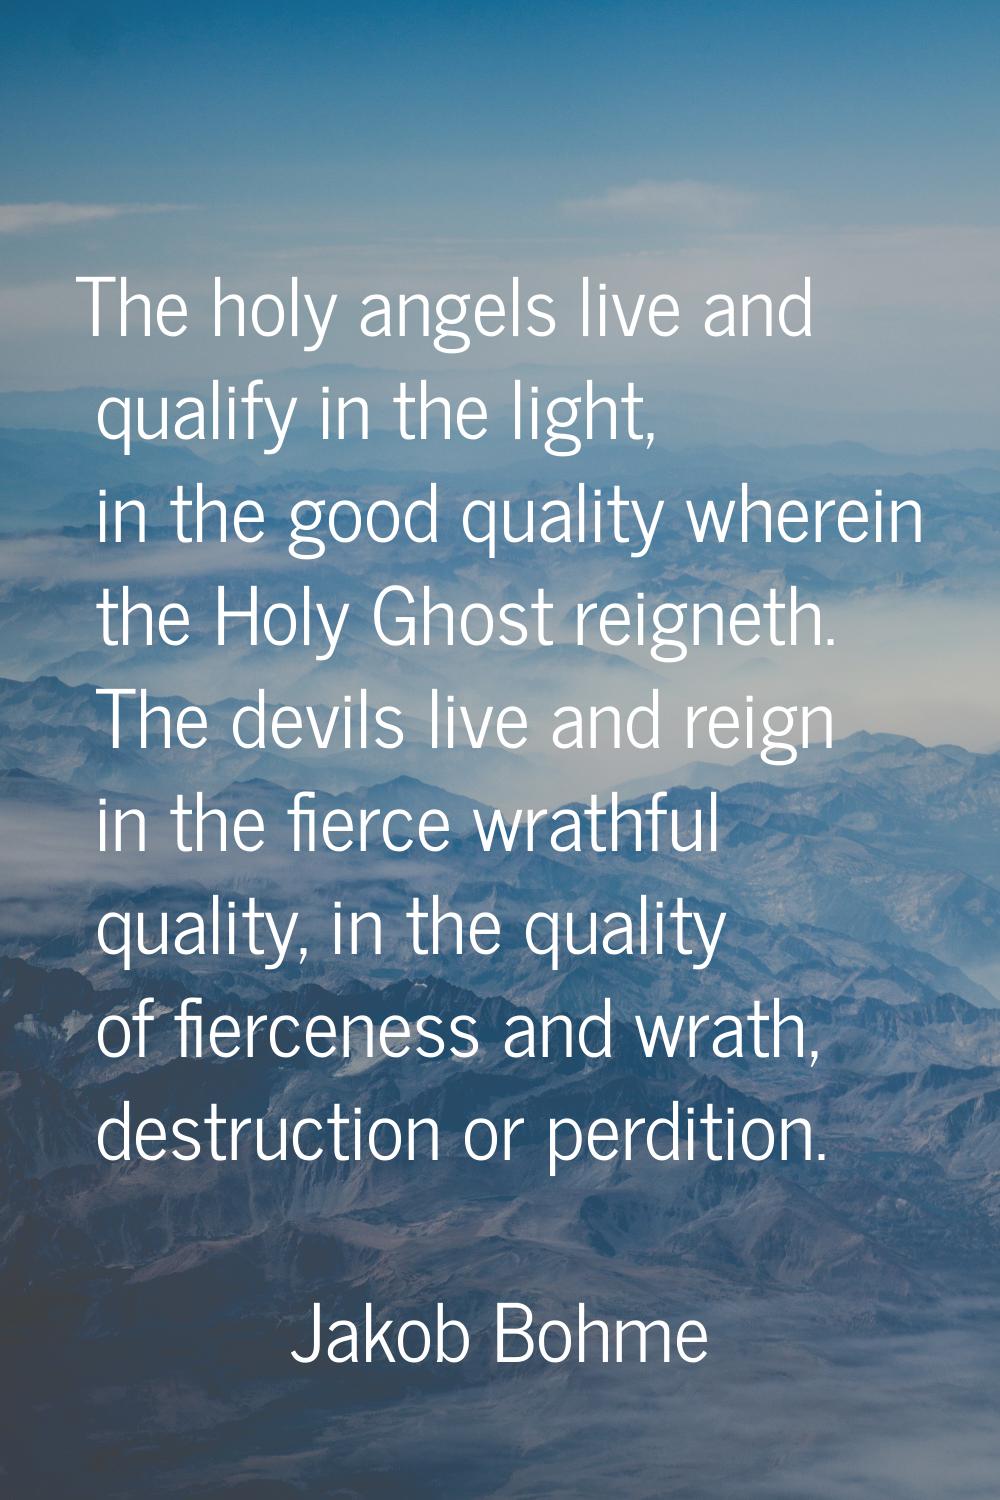 The holy angels live and qualify in the light, in the good quality wherein the Holy Ghost reigneth.